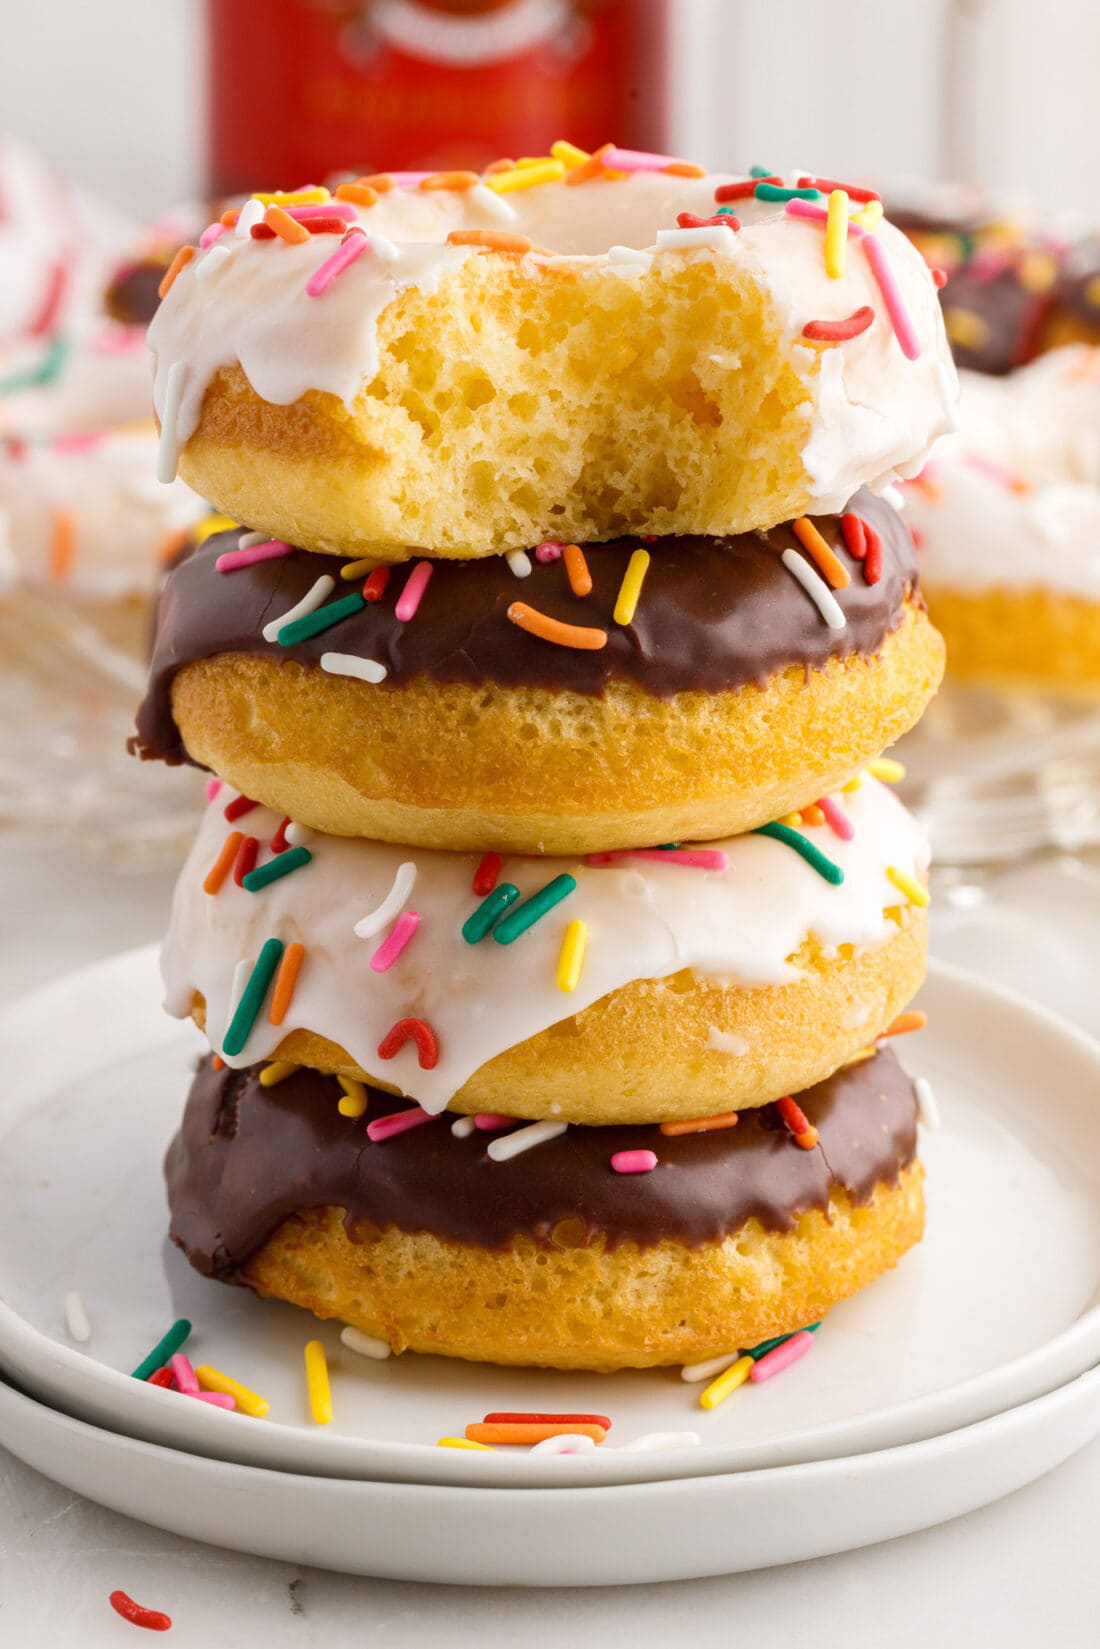 Cake Mix Donut with a bite taken out sitting on top of a stack of three Cake Mix Donuts